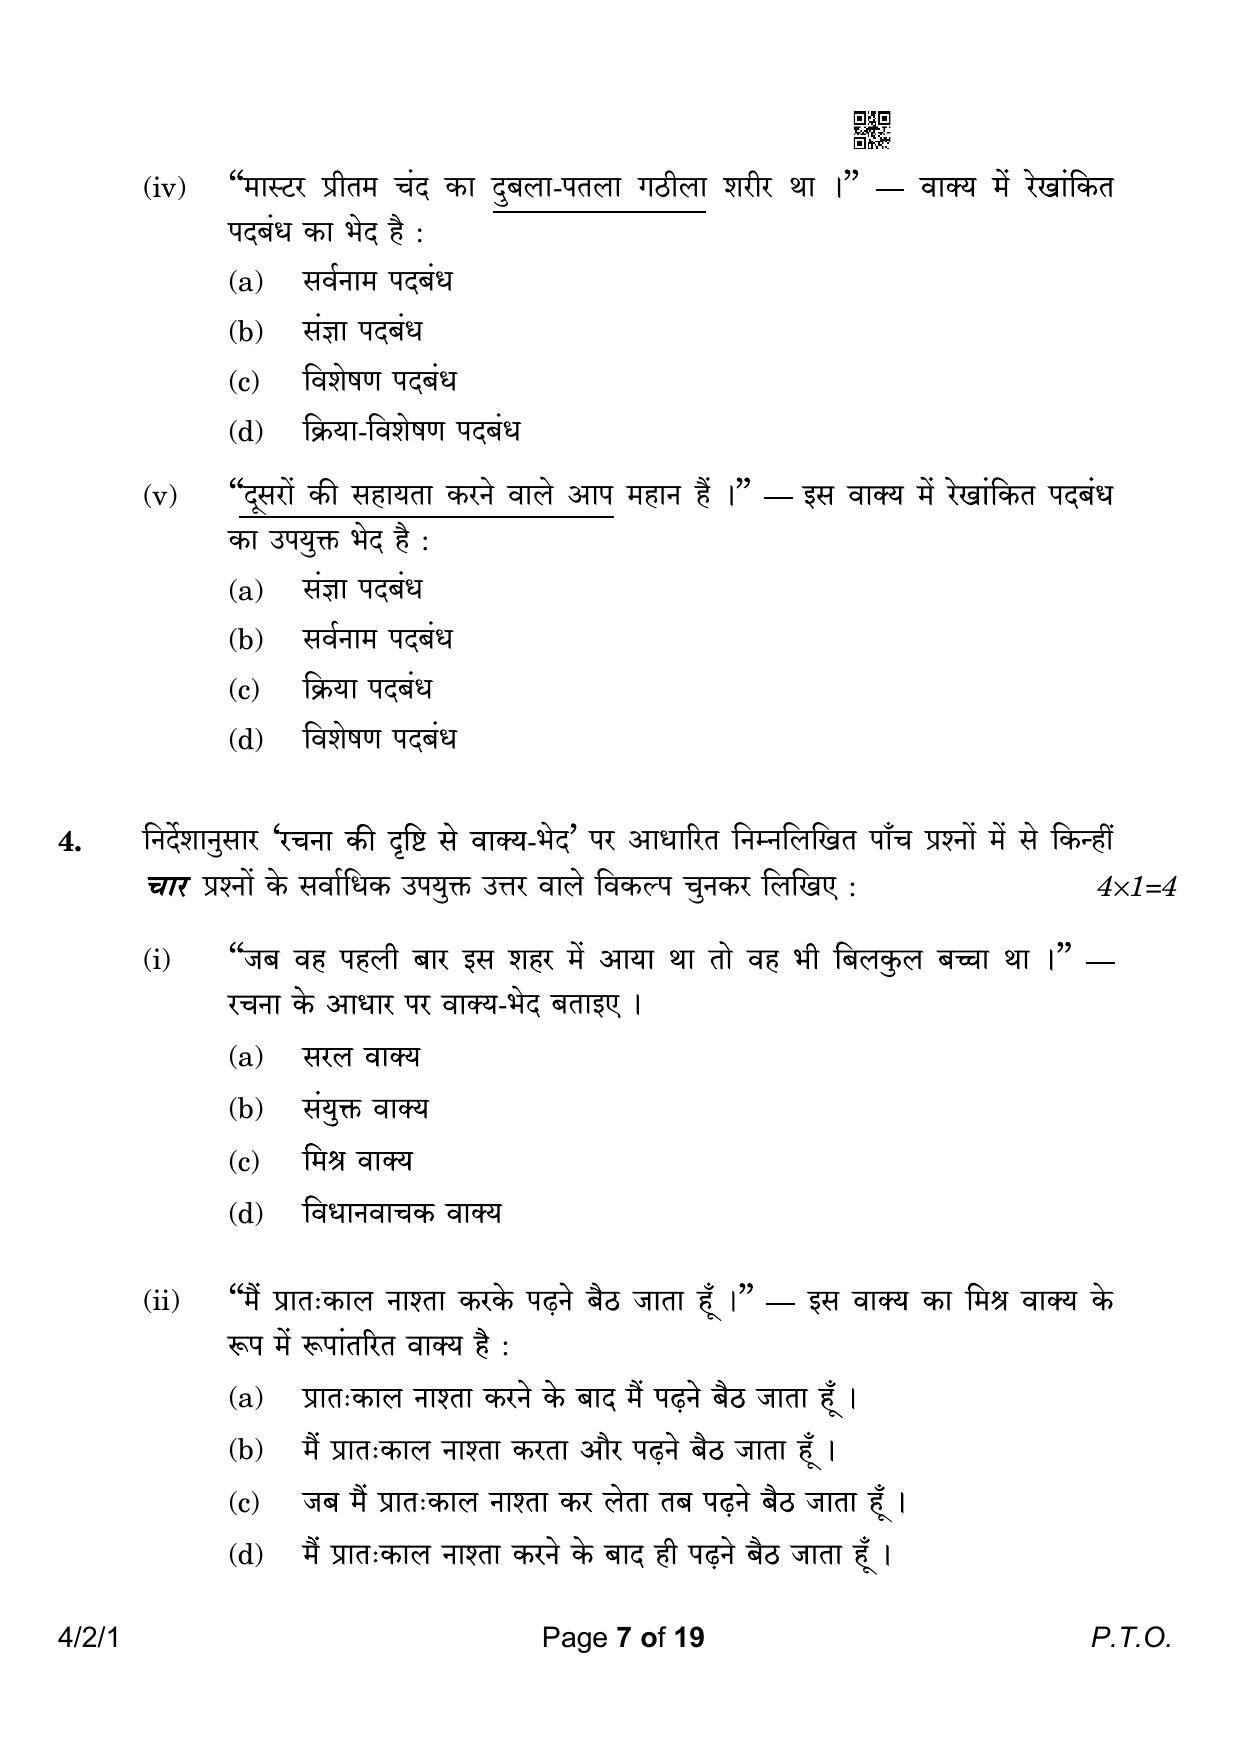 CBSE Class 10 4-2-1 Hindi B 2023 Question Paper - Page 7